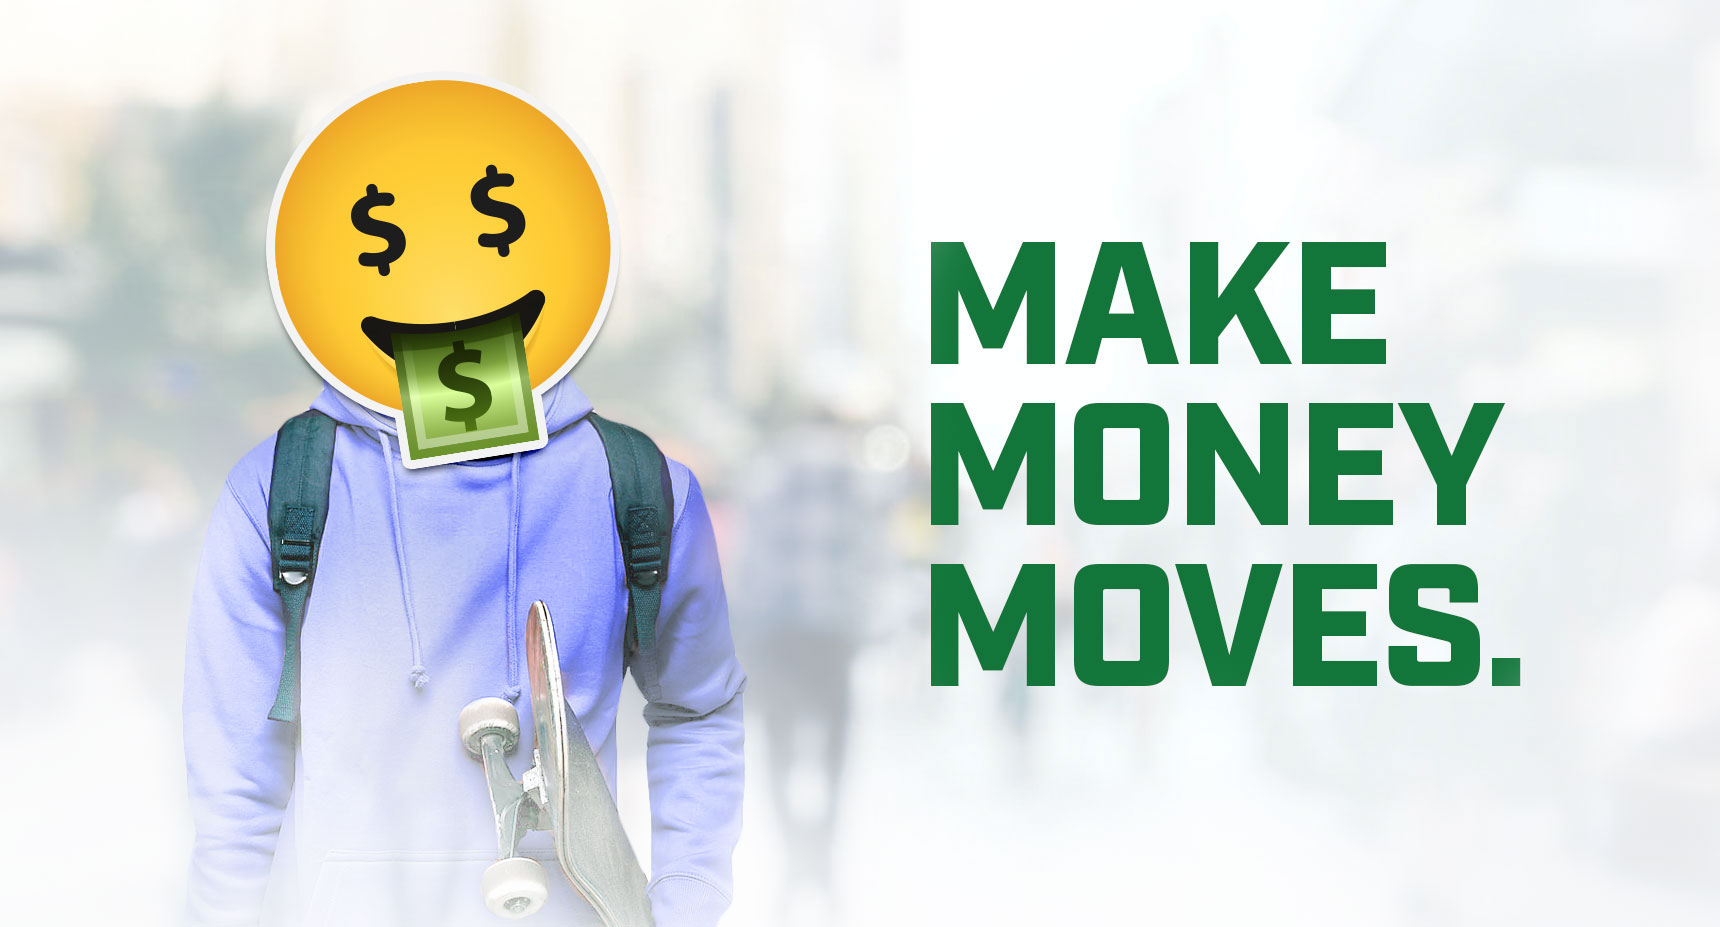 Make Money Moves! Image is of a young person with a skateboard. A smiling emoji sticker is covering their face.